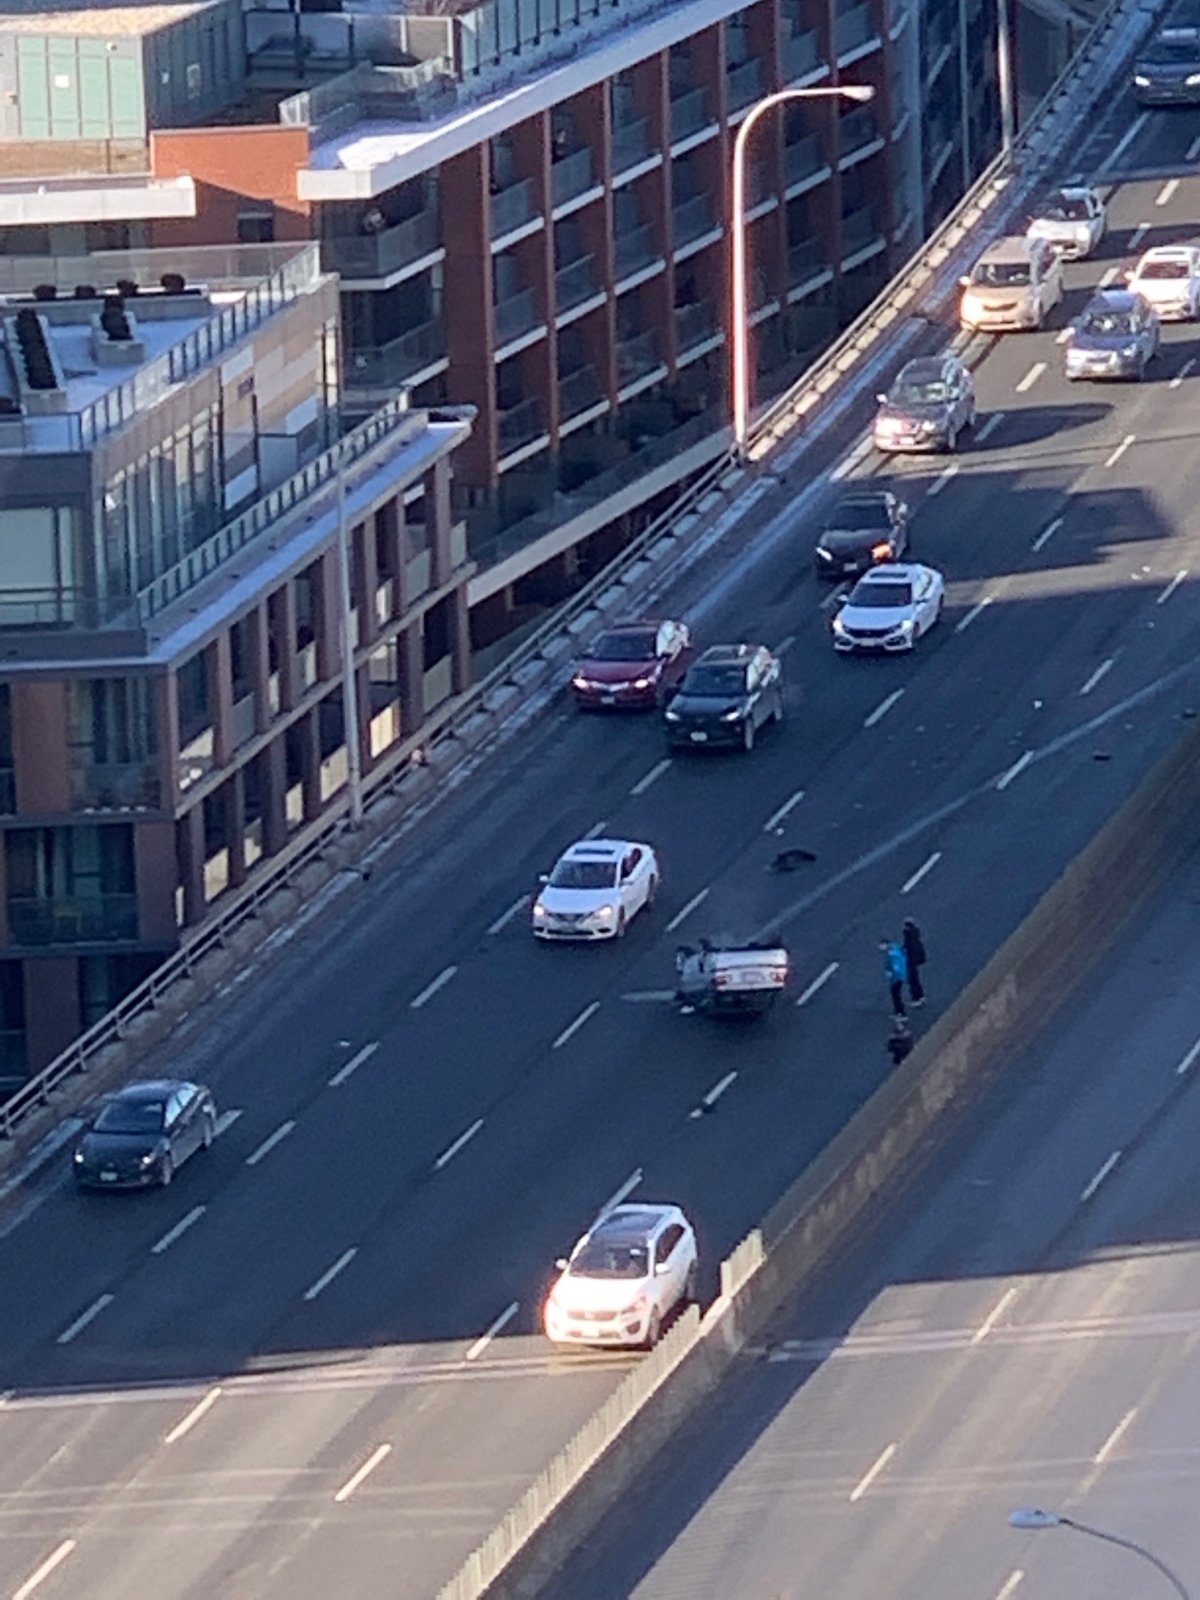 Toronto Police say a man in his 70s has been taken to hospital as a precaution after receiving reports of a vehicle rollover on the Gardiner Expressway on Sunday.